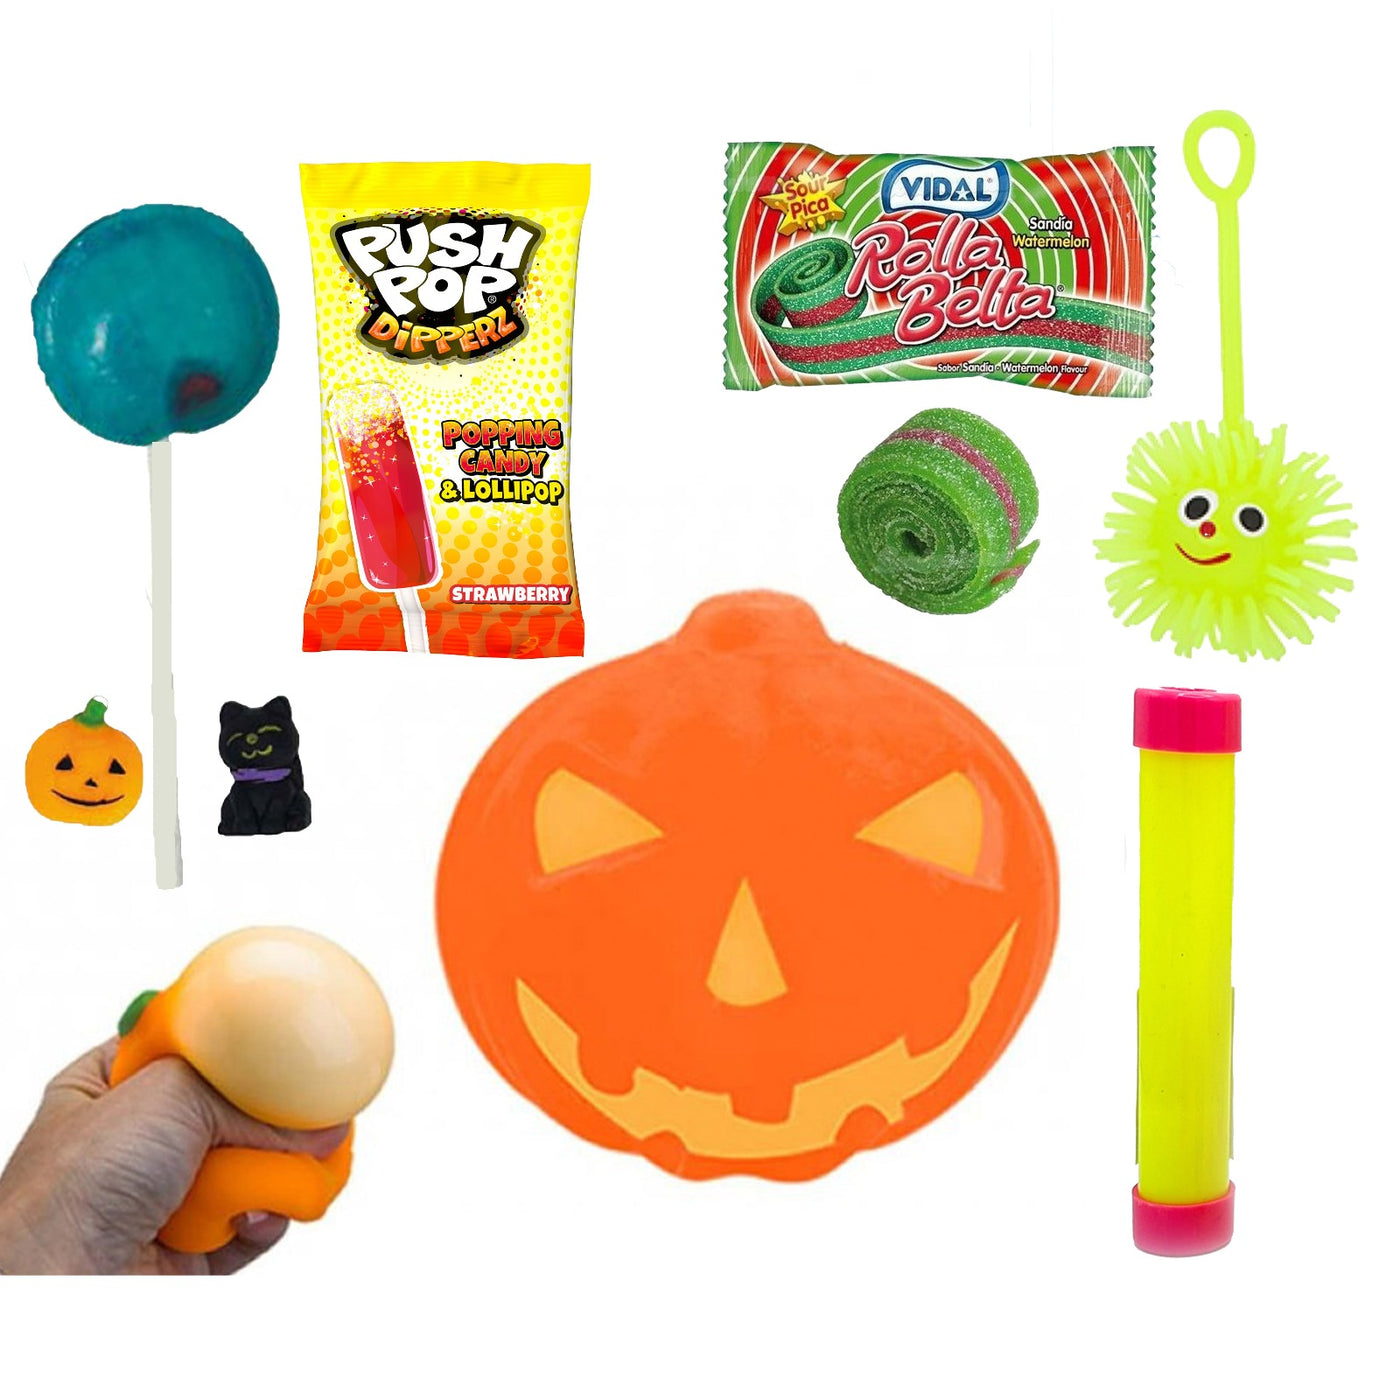 Halloween Party Treats For Children With Toys And Novelty Sweets.